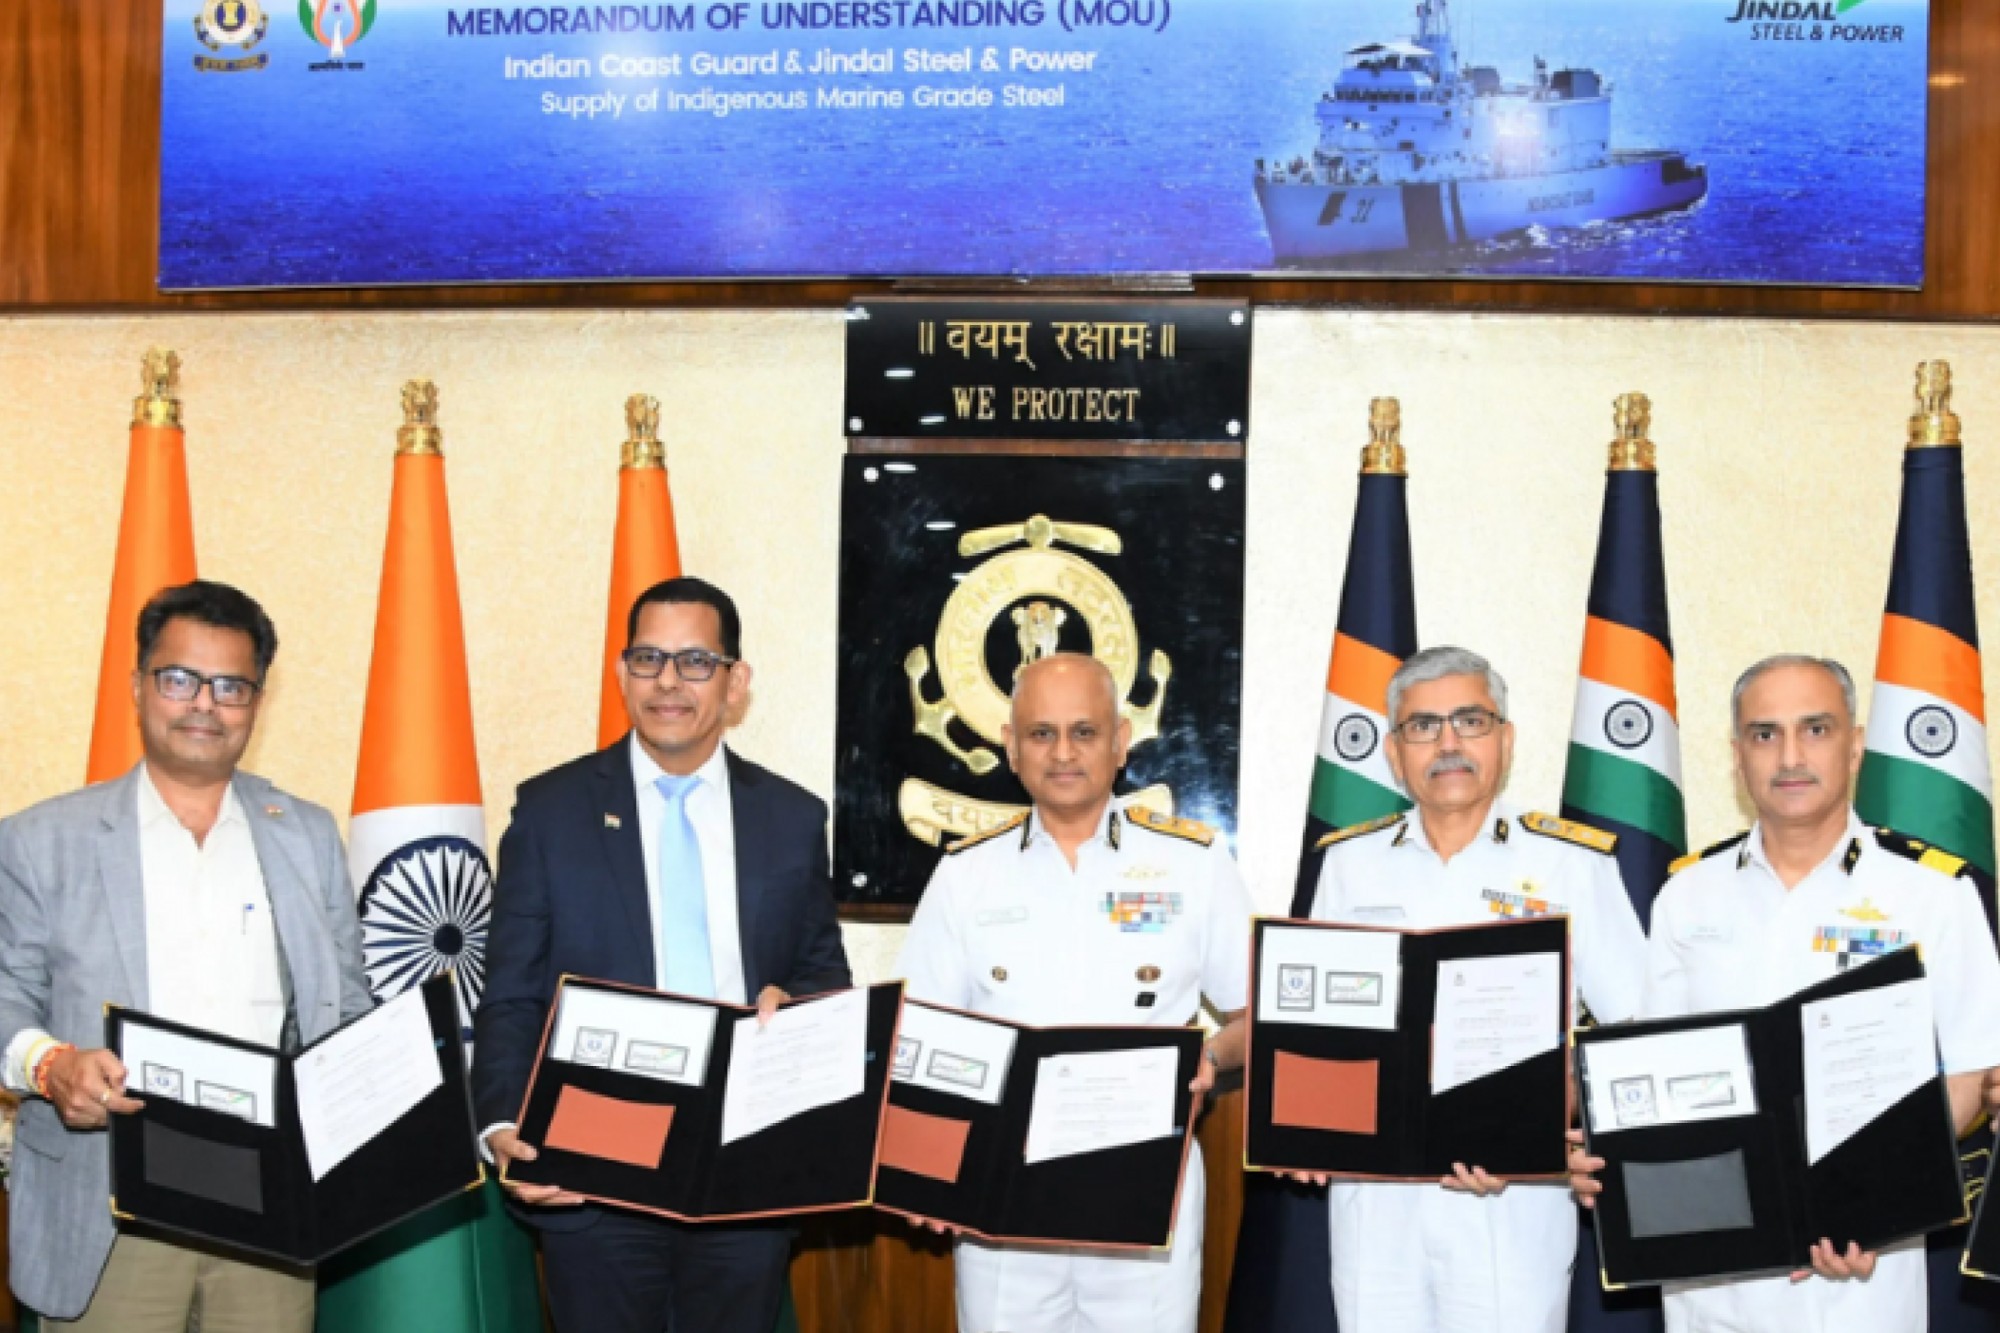 Indian Coast Guard partners with the private sector for indigenous marine steel